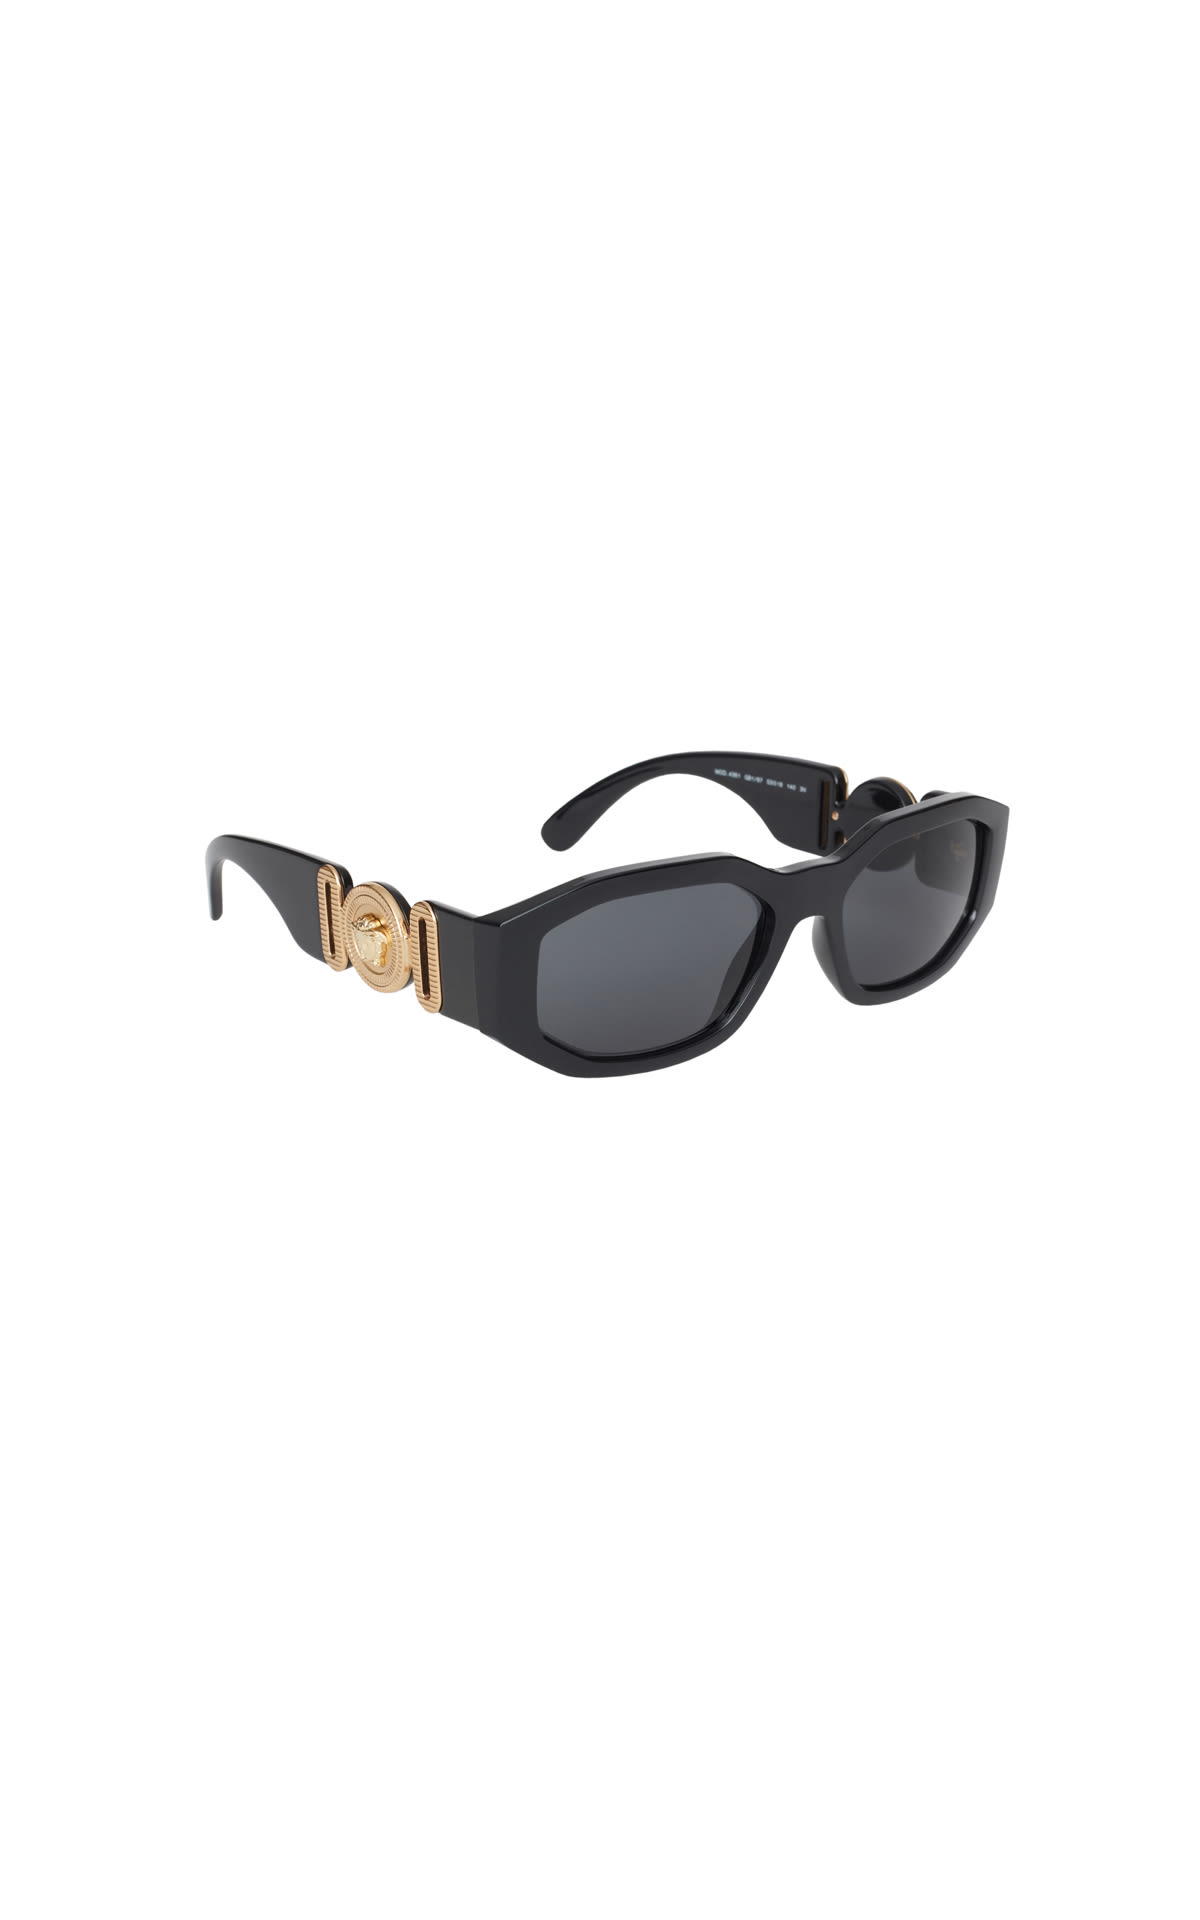 David Clulow Versace Sunglasses from Bicester Village